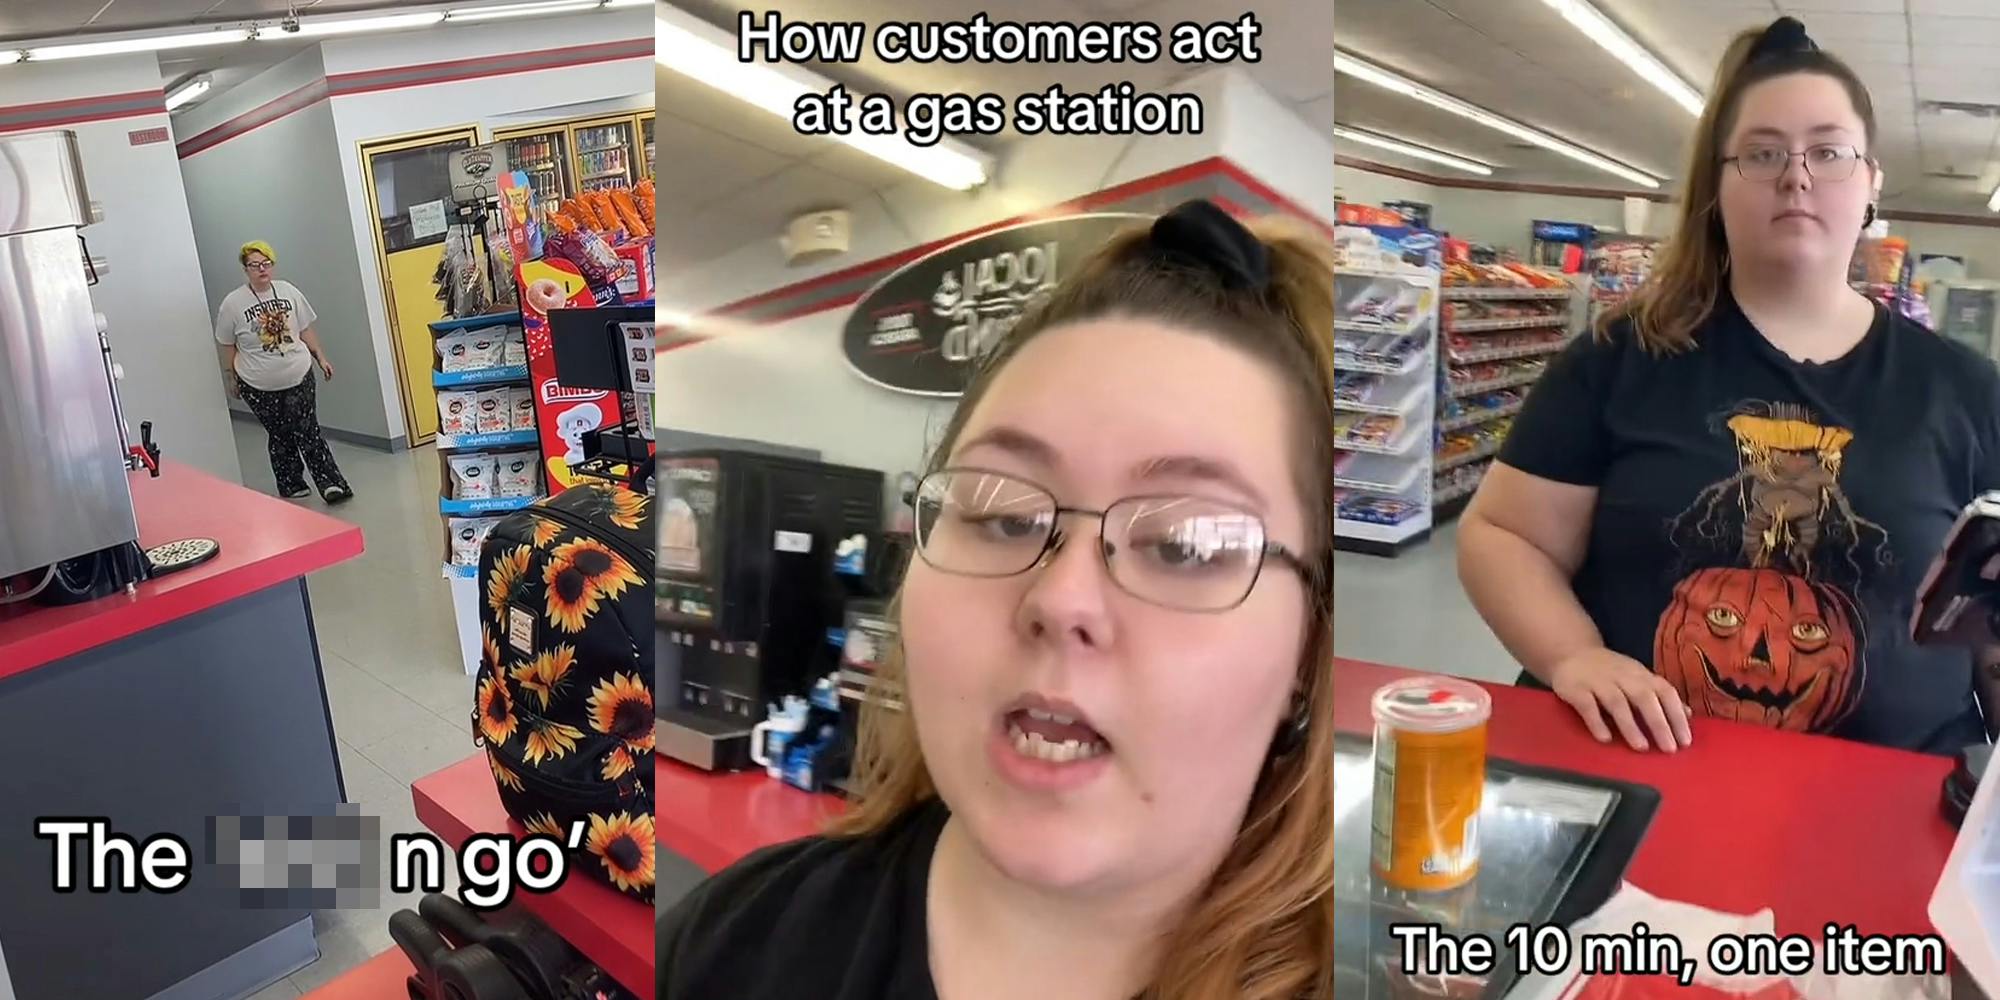 gas station worker walking out of bathroom with caption "The blank n go'" (l) gas station worker speaking with caption "How customers act at a gas station (c) gas station worker at register with one item with caption "The 10 min, one item" (r)